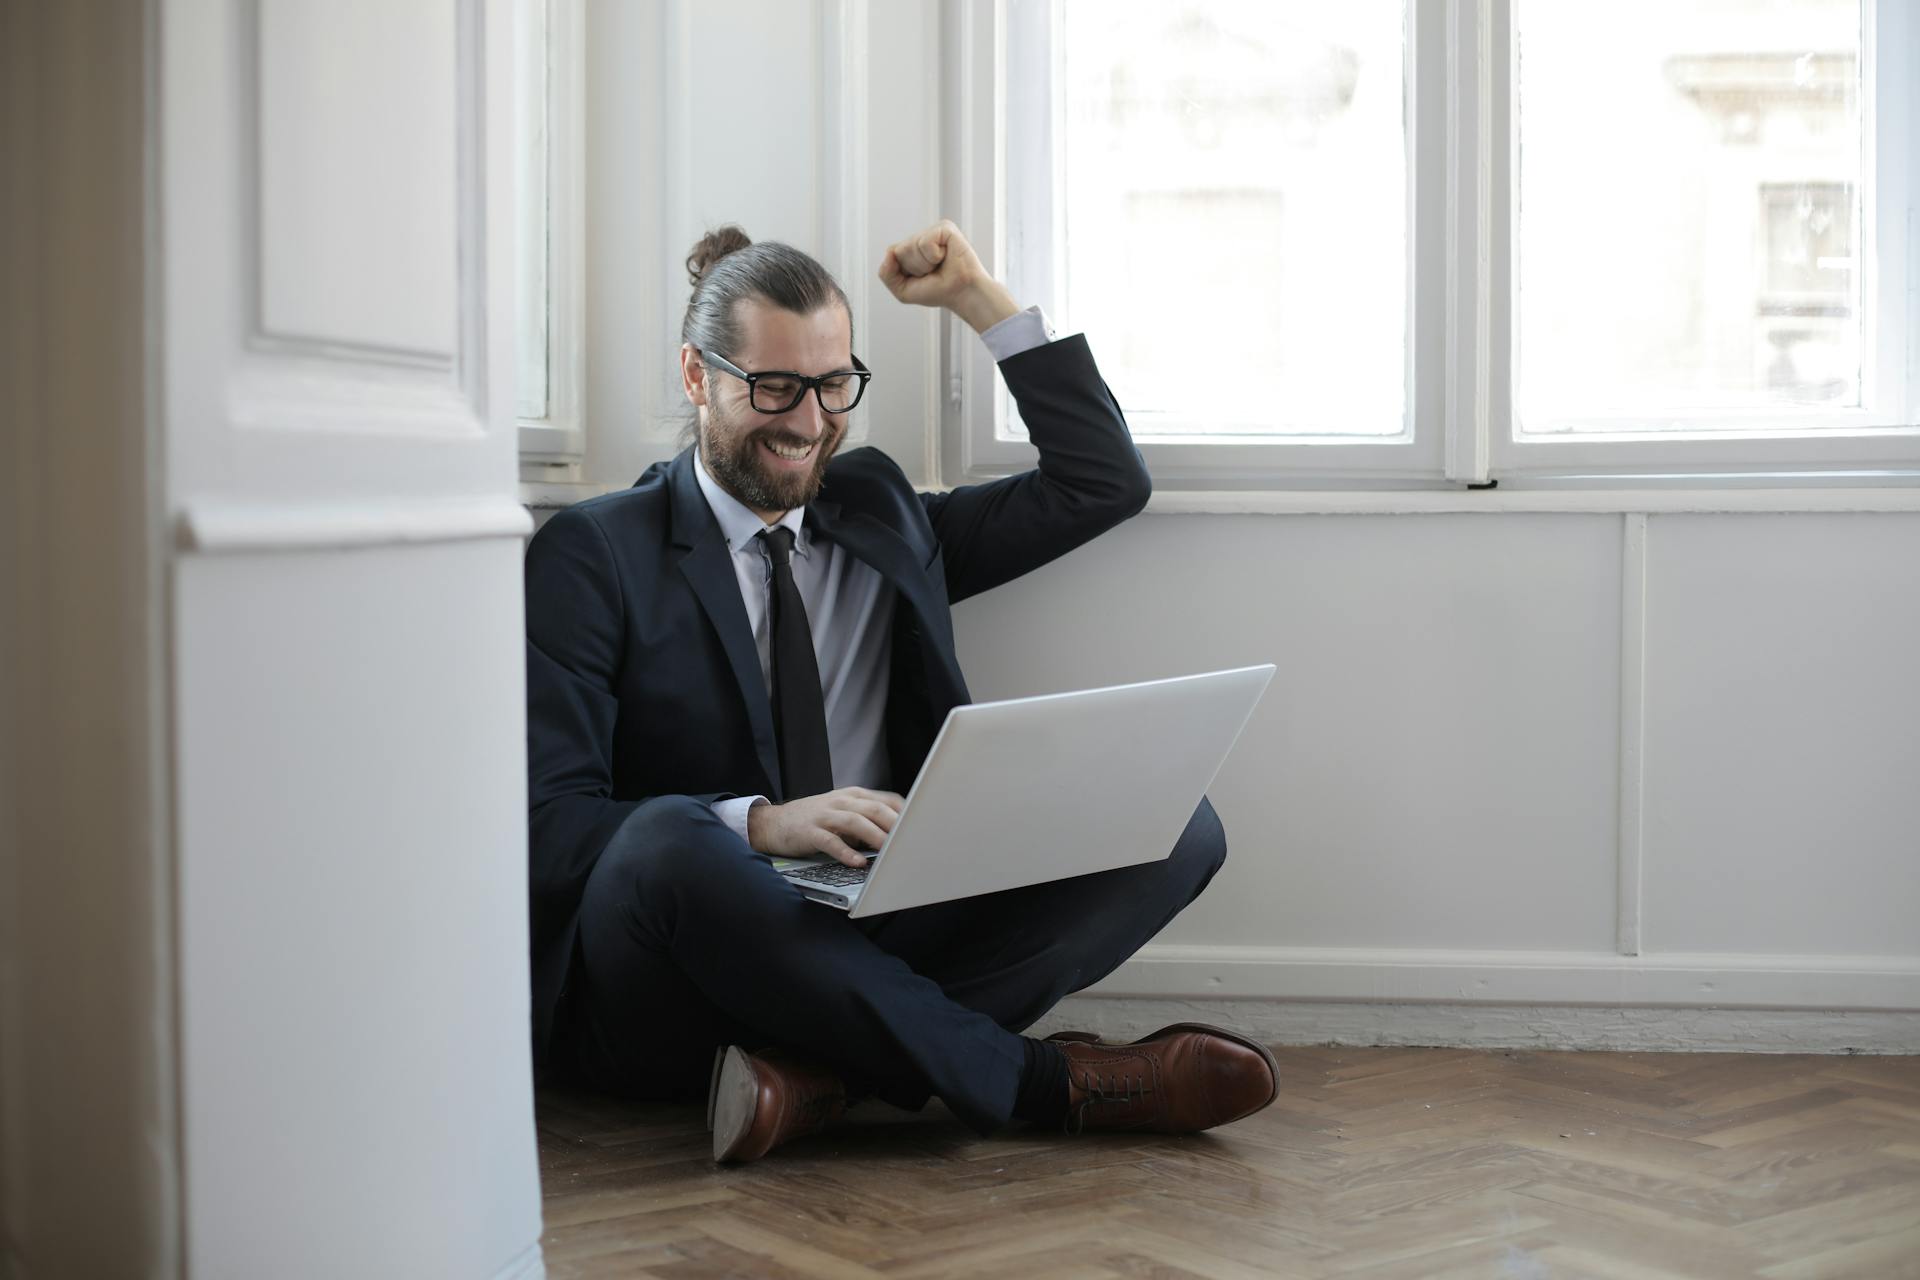 Happy business owner with laptop in a minimalist room suggesting growth from tech audit